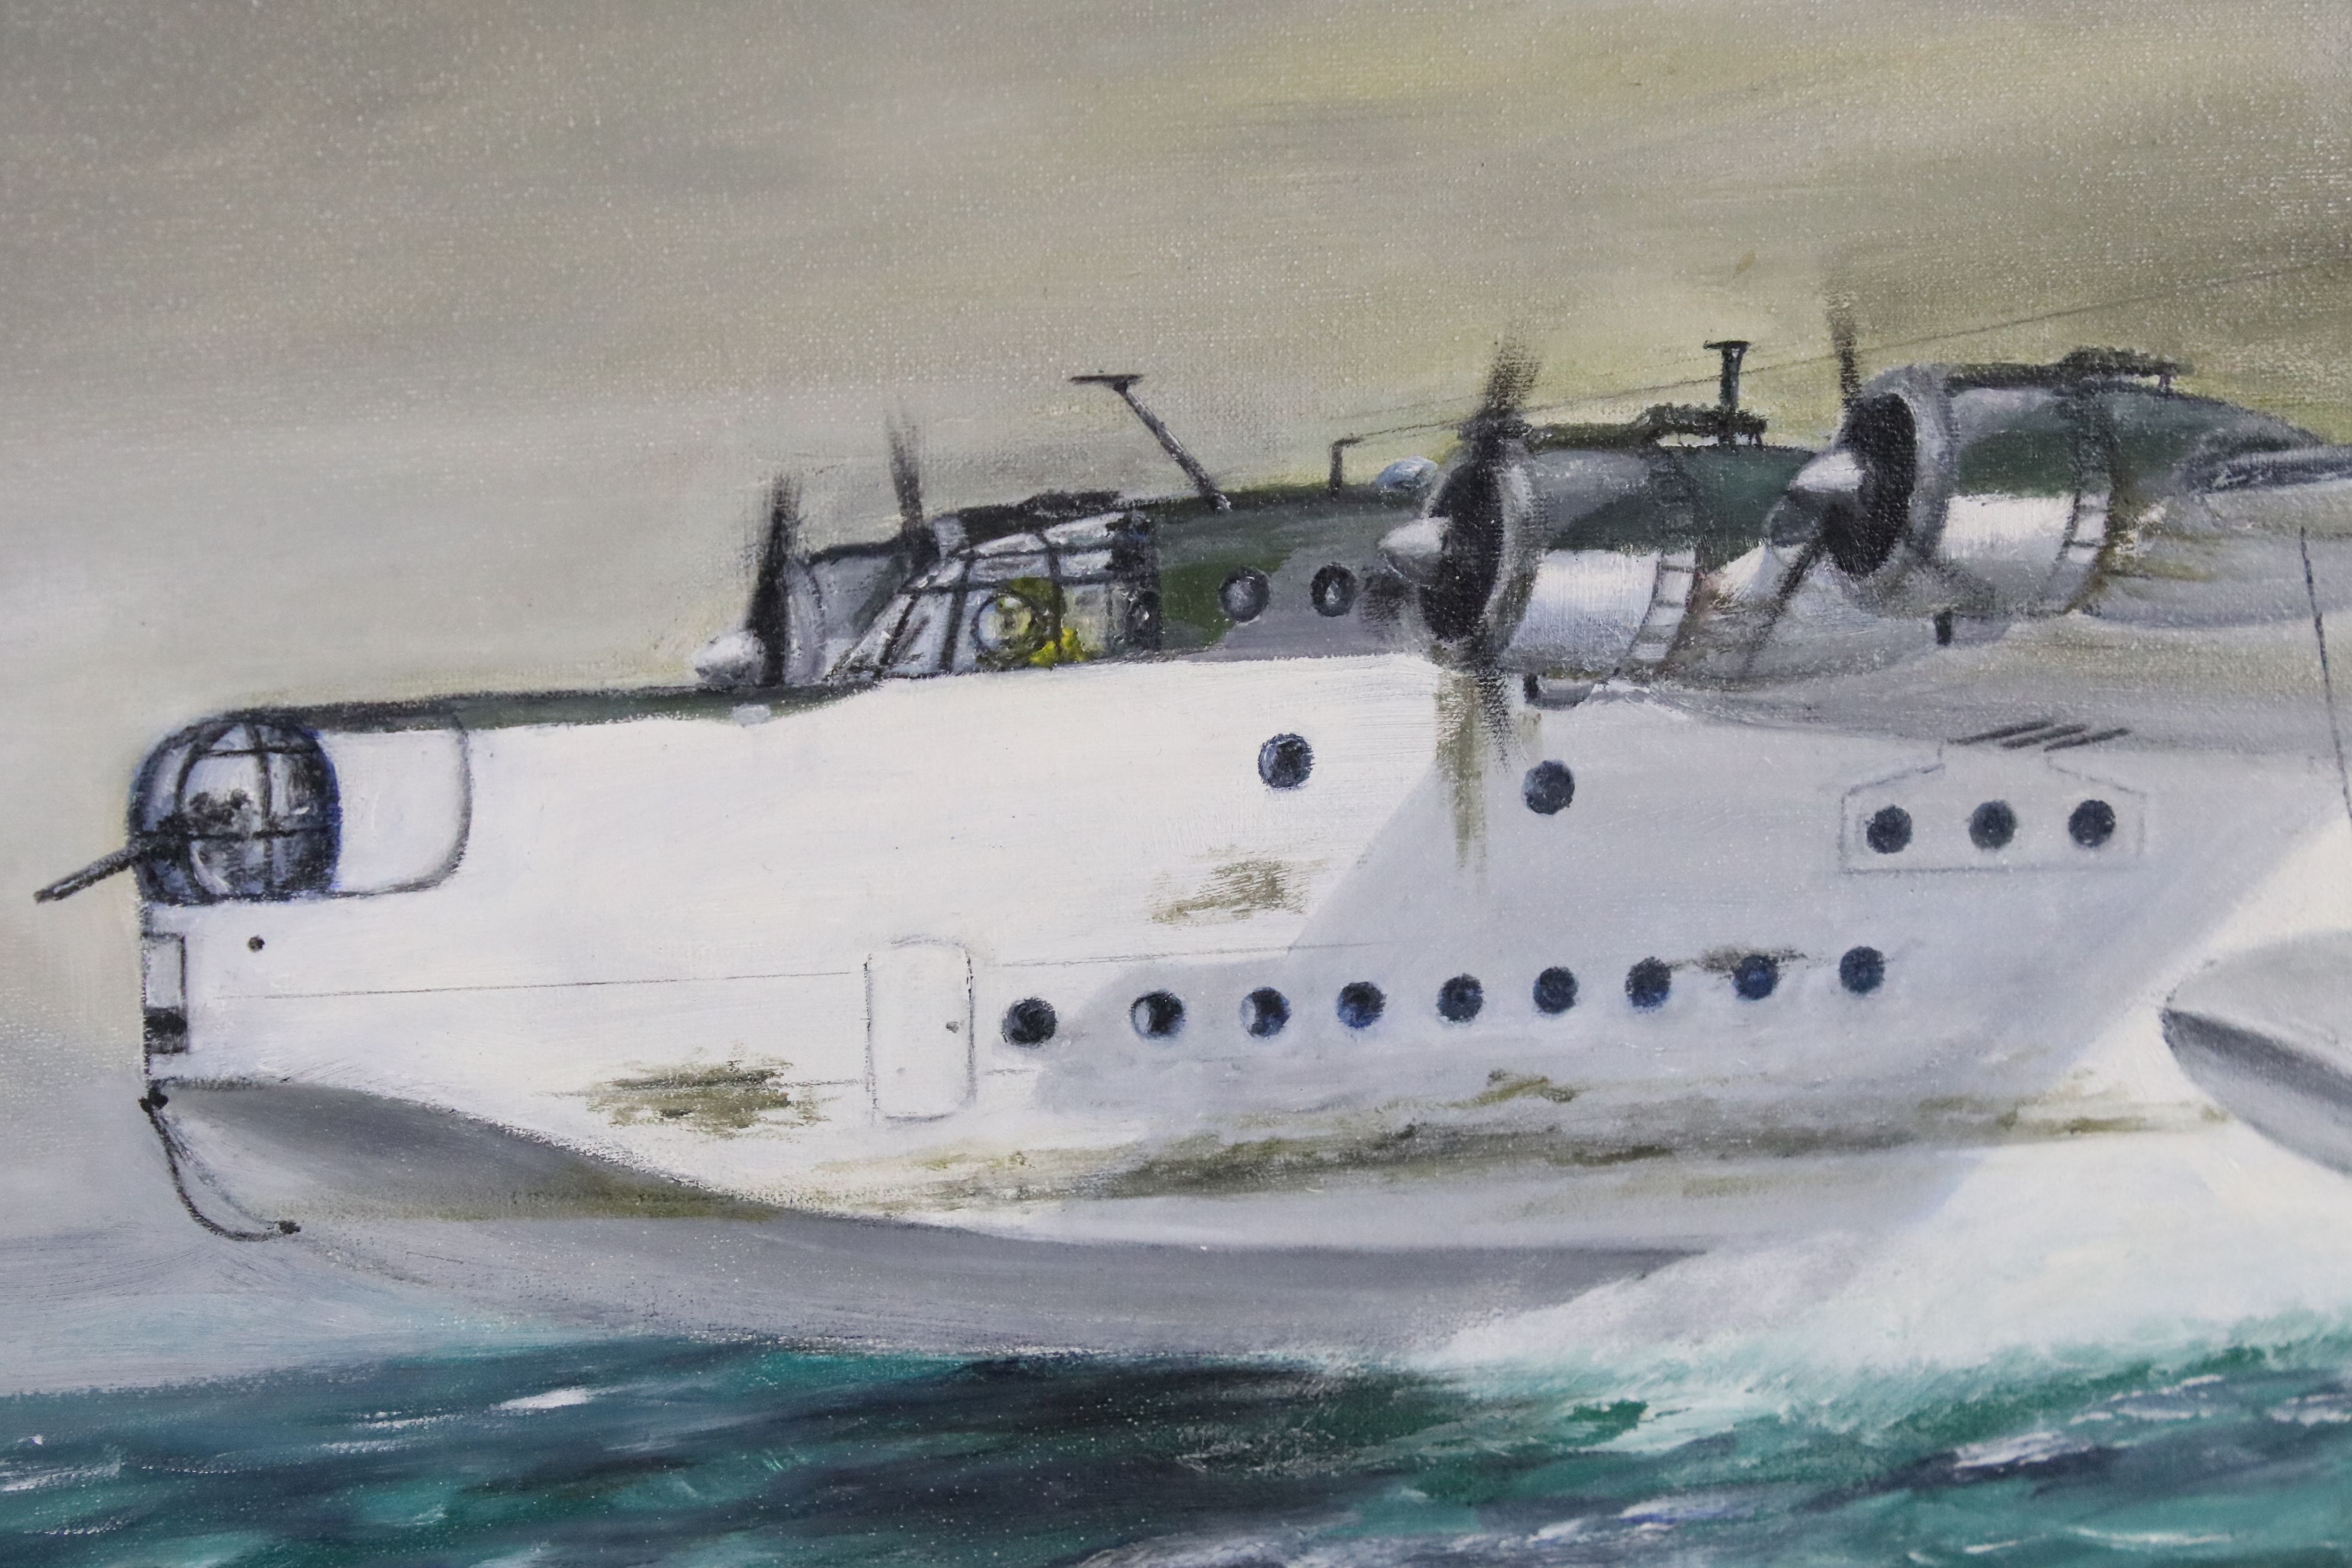 John Brooks (20th century) Oil Painting on Canvas of a Sunderland Flying Boat, signed lower right, - Image 9 of 12